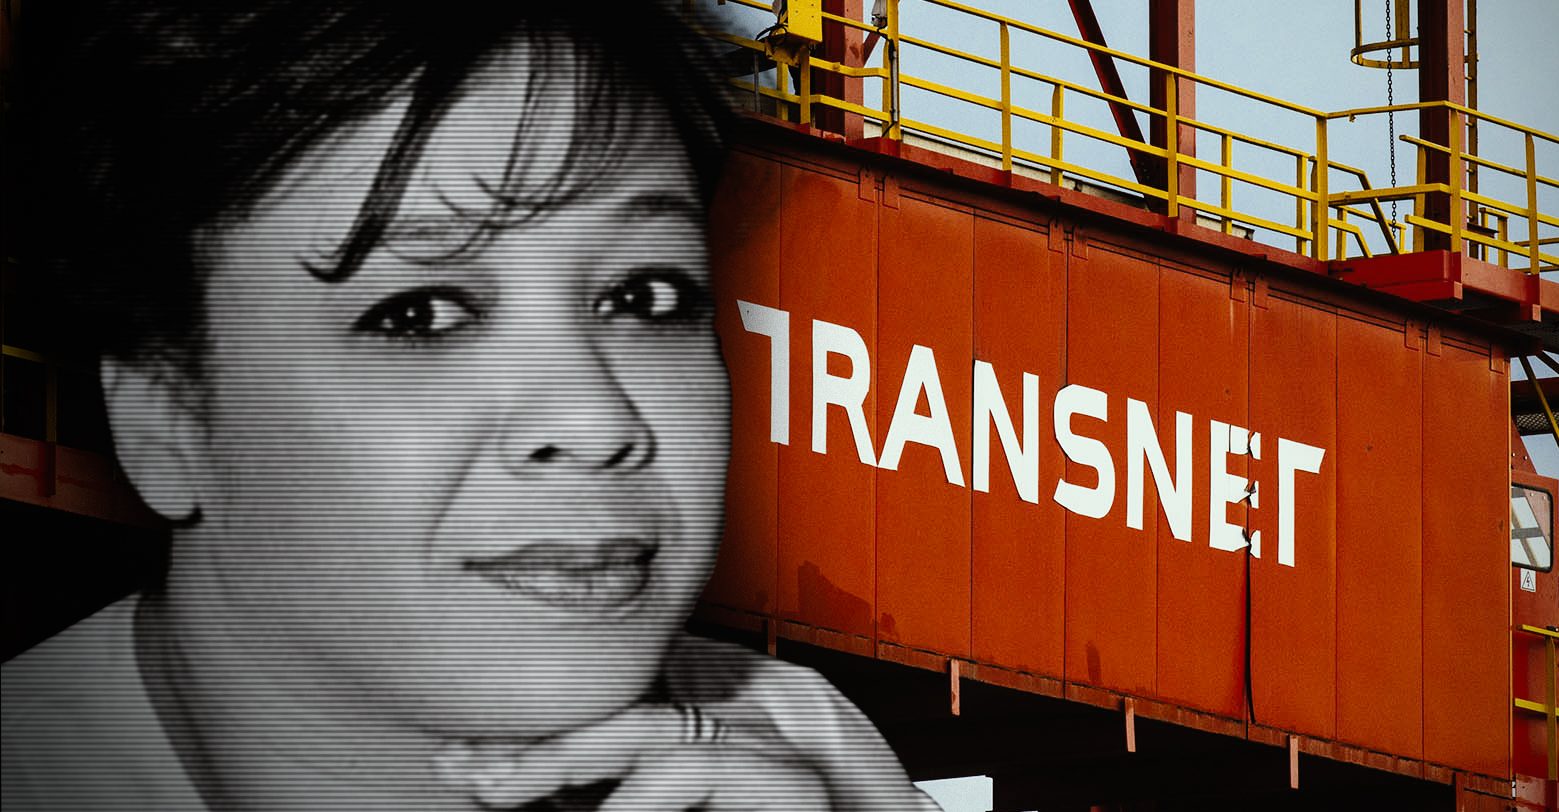 acting transnet boss phillips emerges as frontrunner after board lists preferred ceo candidates